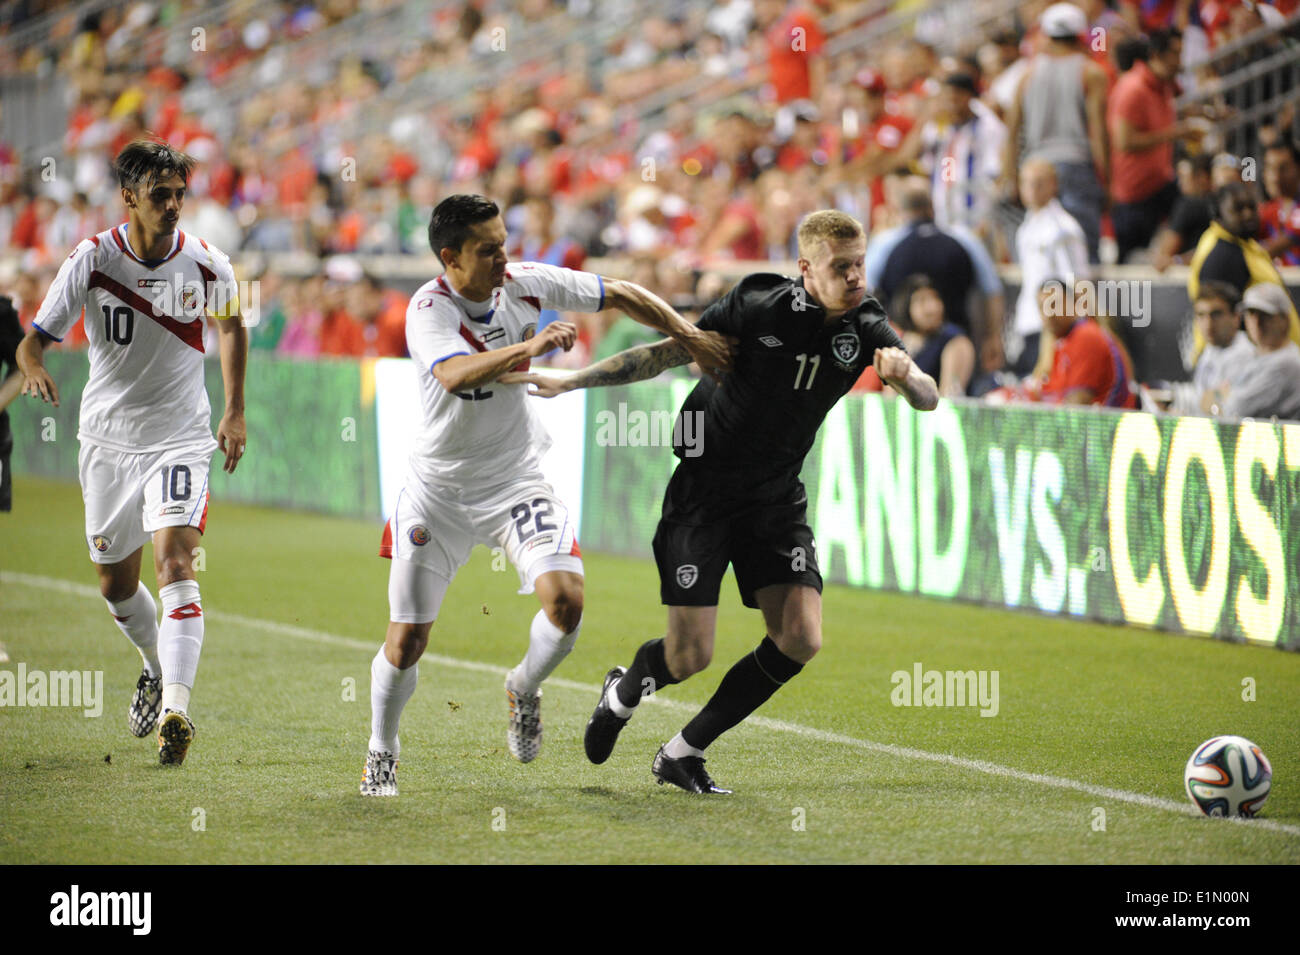 Chester, Pennsylvania, USA. 6th June, 2014. Costs Rica player, JOSE MIGUEL CUBERO (22) in action against Ireland player, JAMES MCCLEAN (1I) during the Freedom Cup match held at PPL Park in Chester Pa Credit:  Ricky Fitchett/ZUMAPRESS.com/Alamy Live News Stock Photo